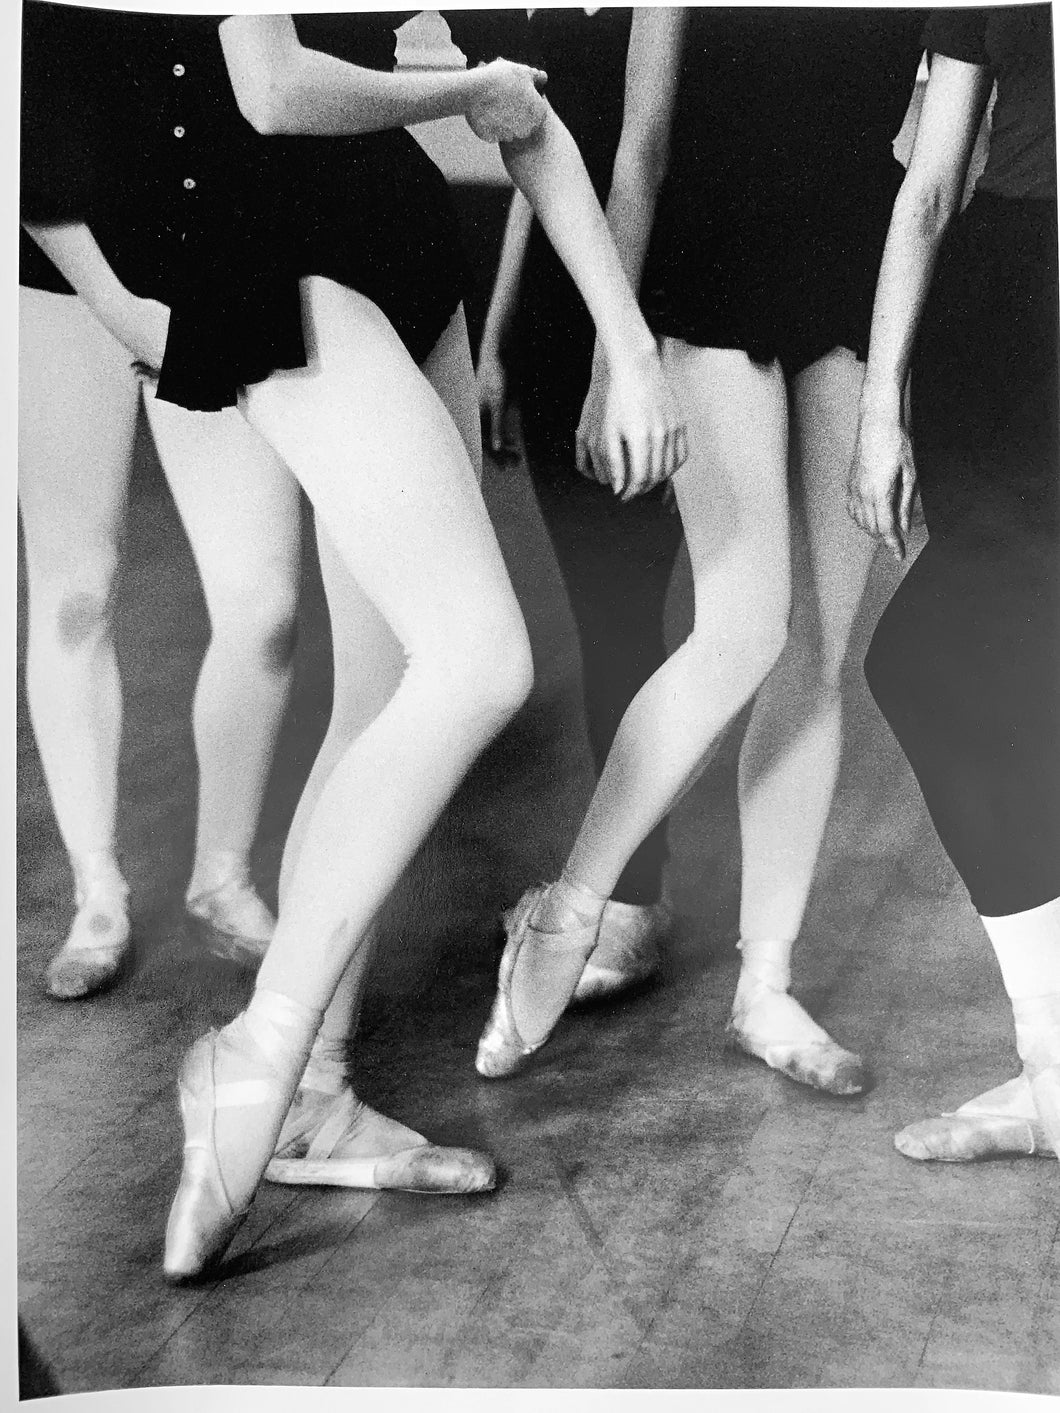 New York City Ballet, Black and White Dance Photography of Young Ballerinas 1960s by Ernst Haas